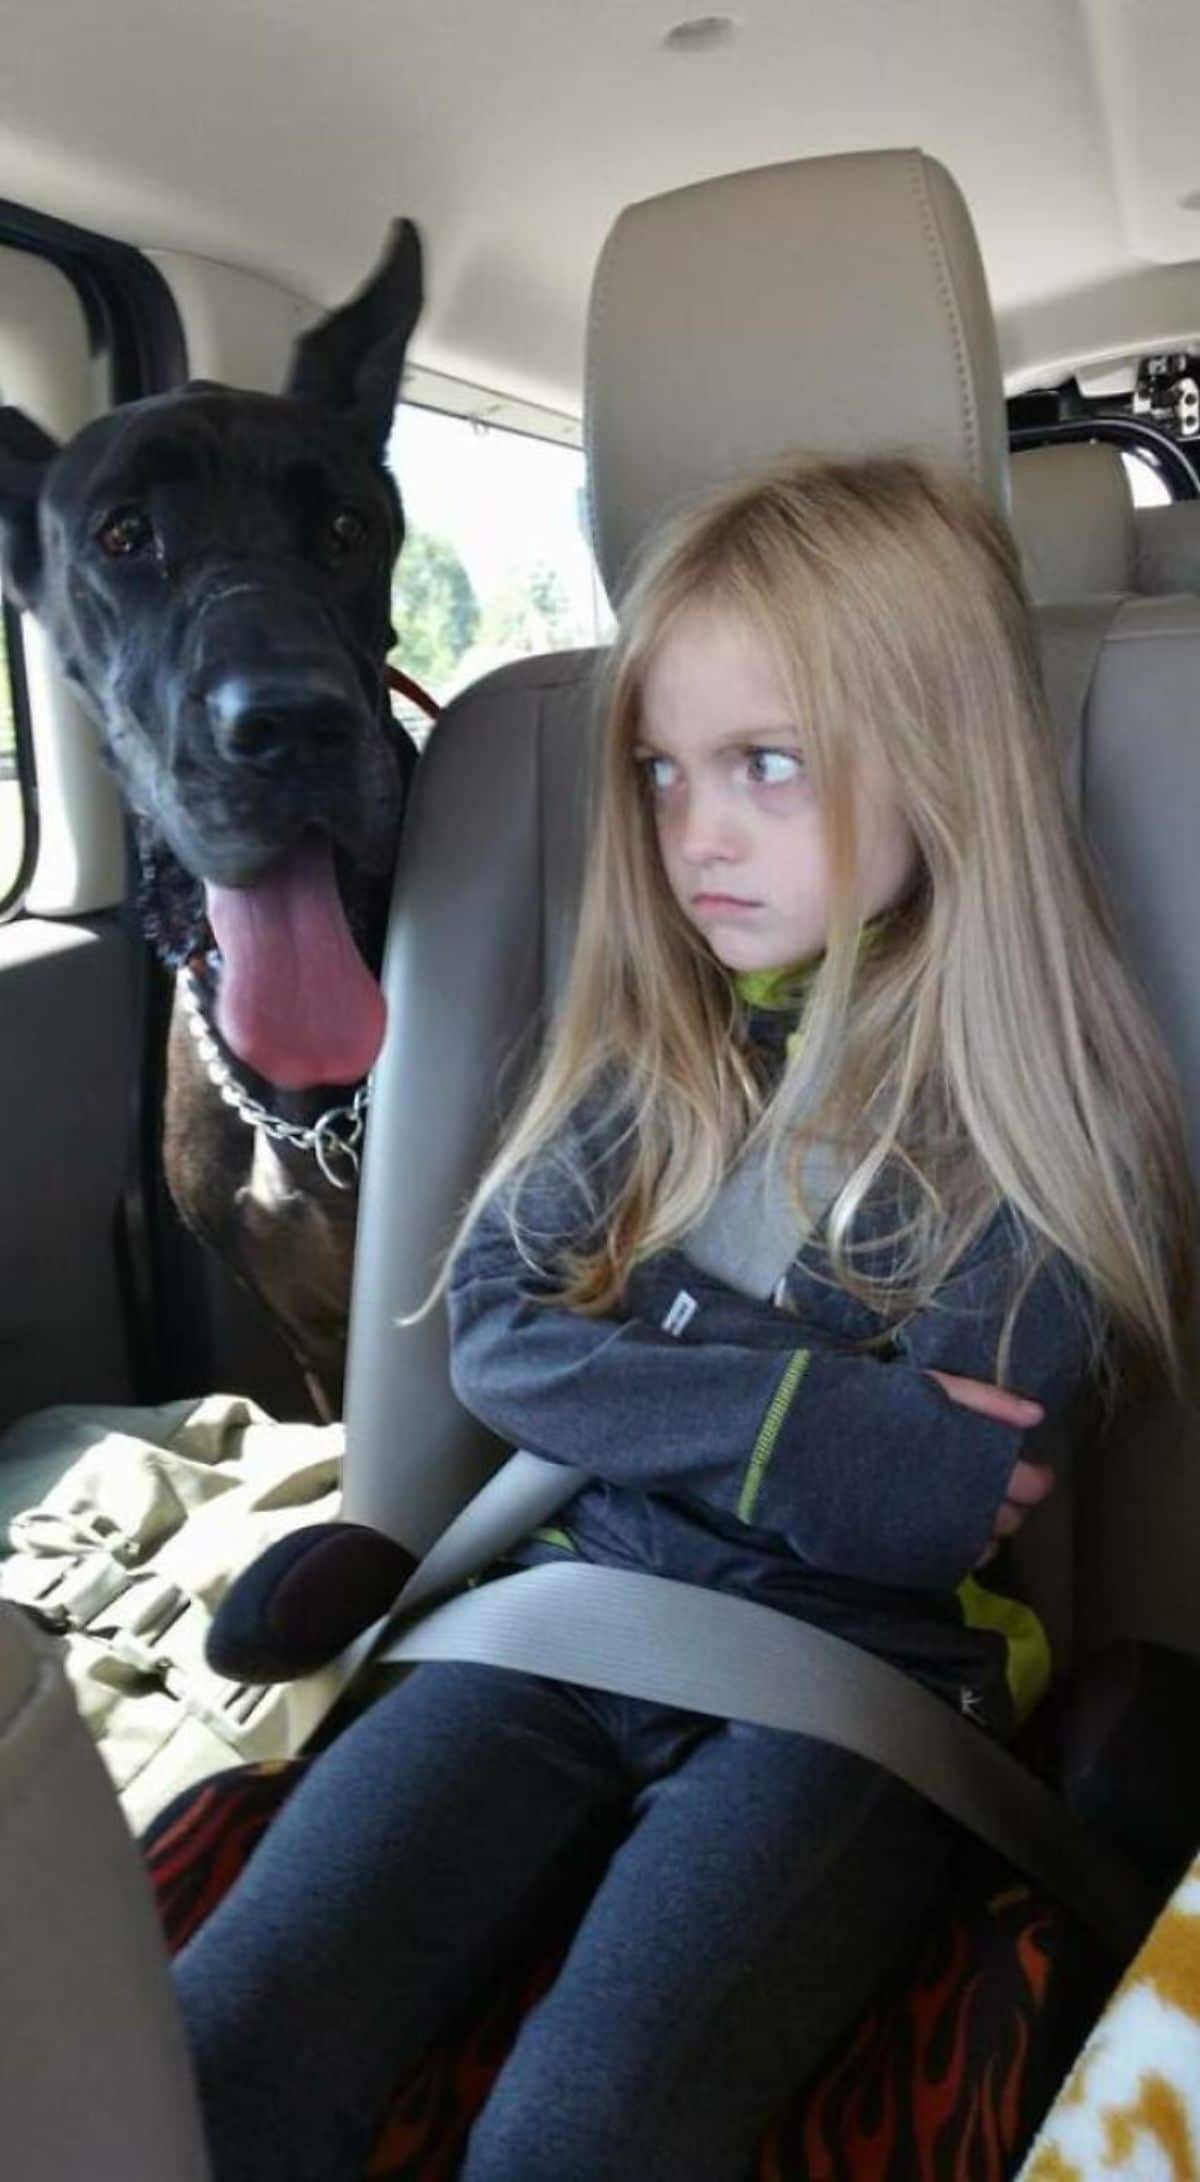 large black and brown dog peeking to the front next to a glaring little girl